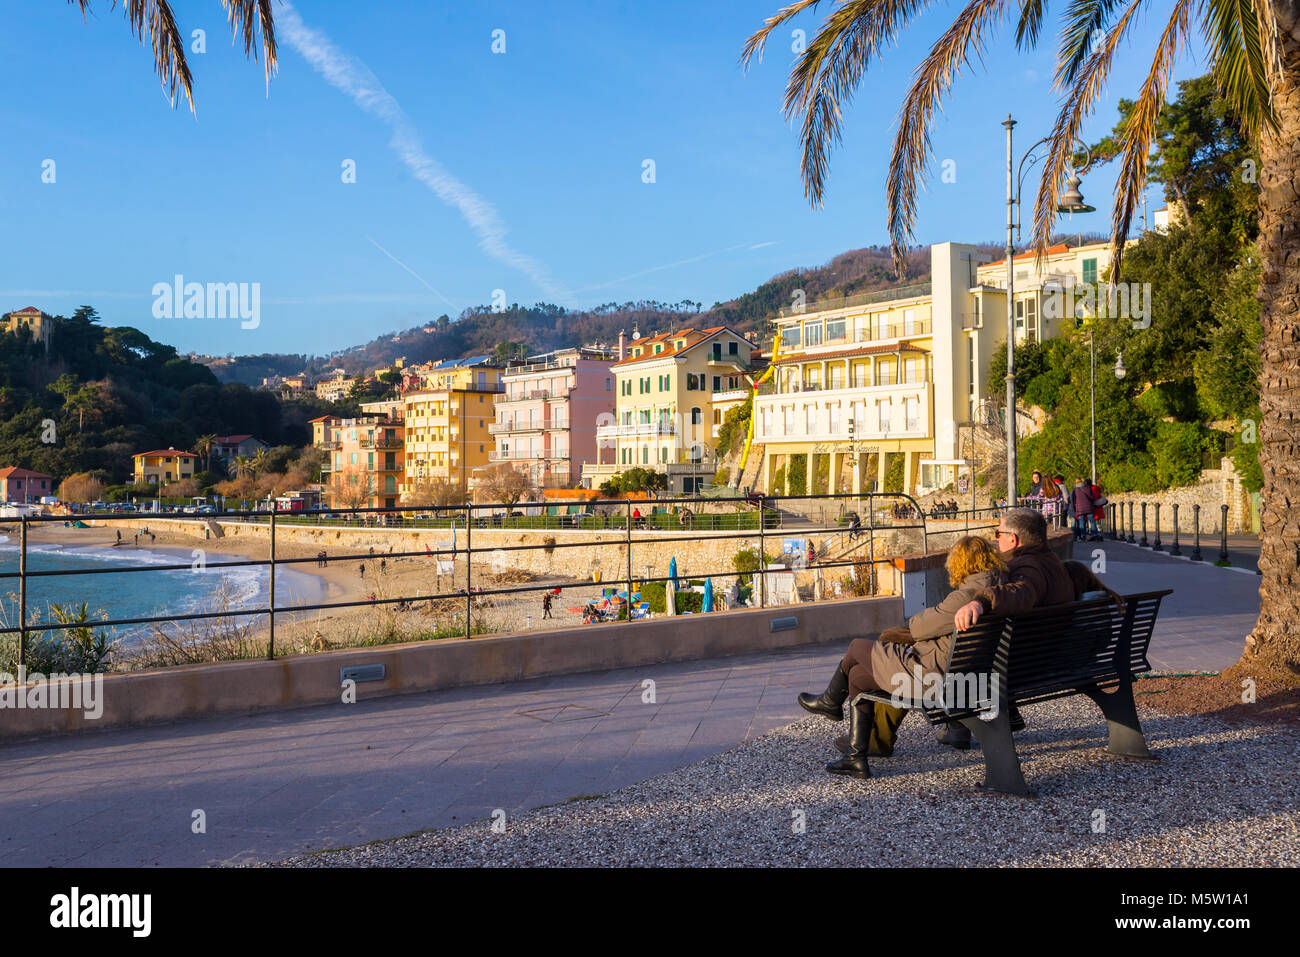 Family of three sitting on a bench admiring the beach view of the famous sea resort tourist town of Lerici, Cinque terre, Liguria, Italy Stock Photo